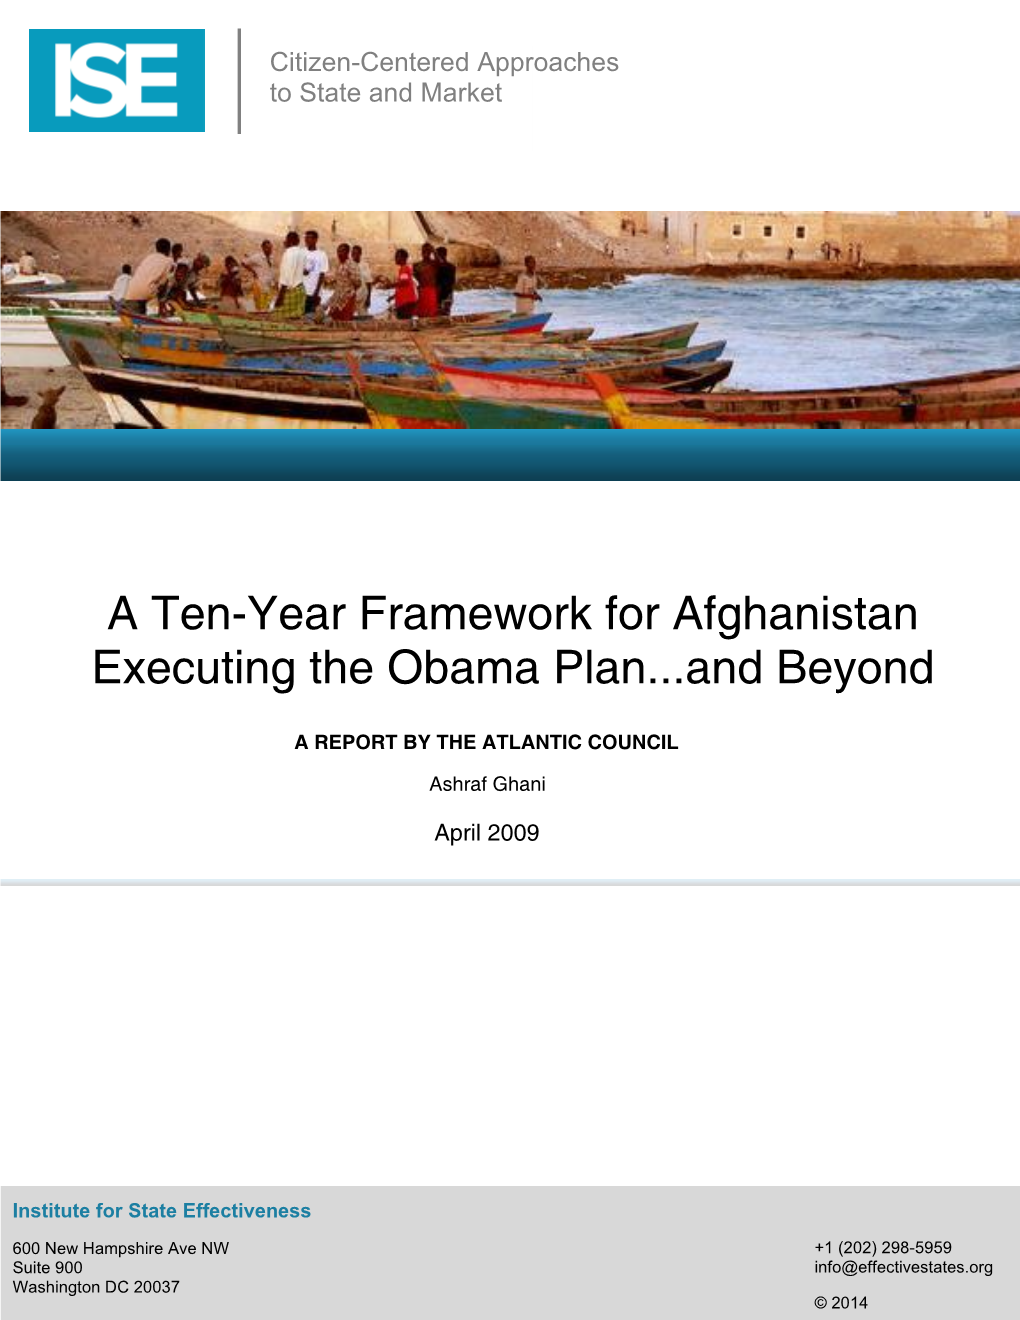 A Ten-Year Framework for Afghanistan Executing the Obama Plan...And Beyond